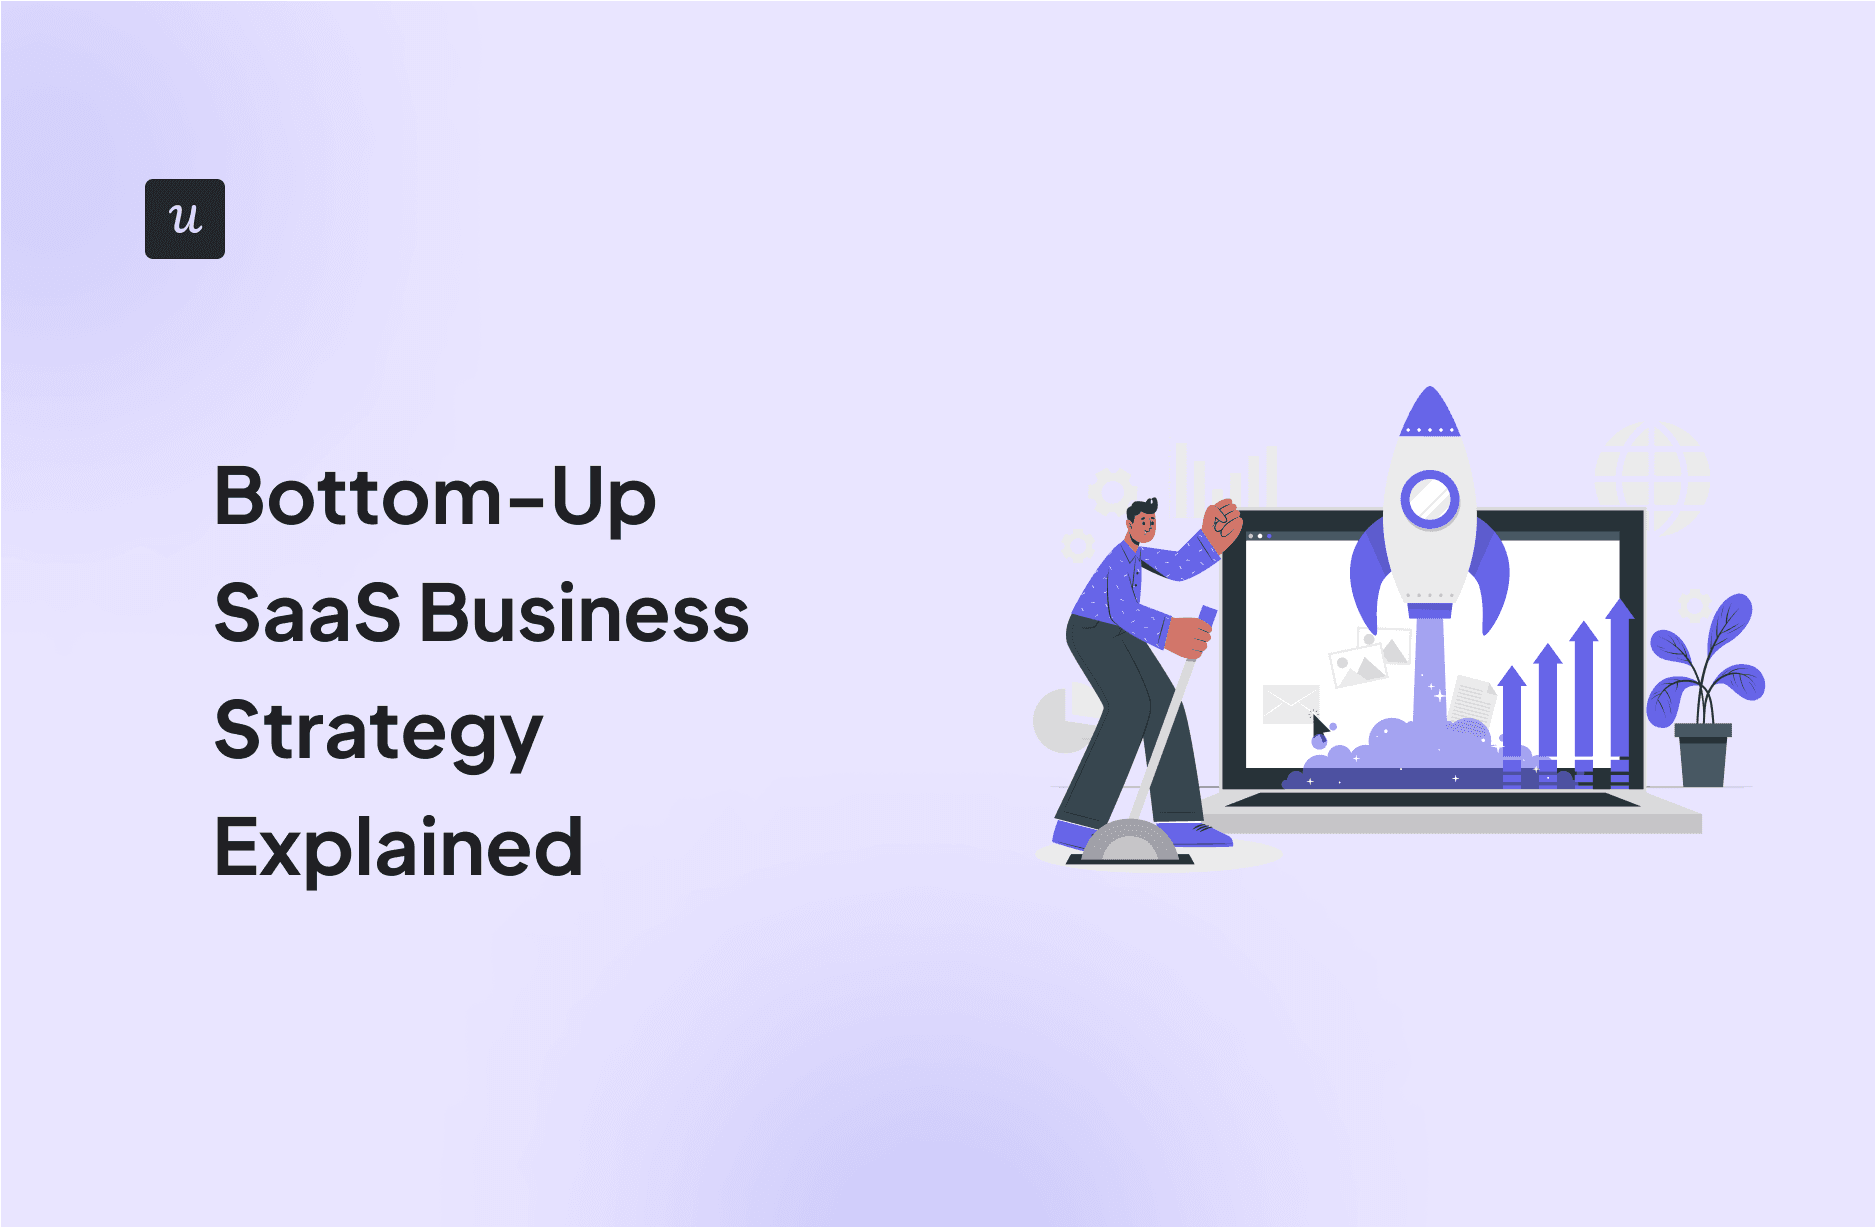 Bottom-Up SaaS Business Strategy Explained cover